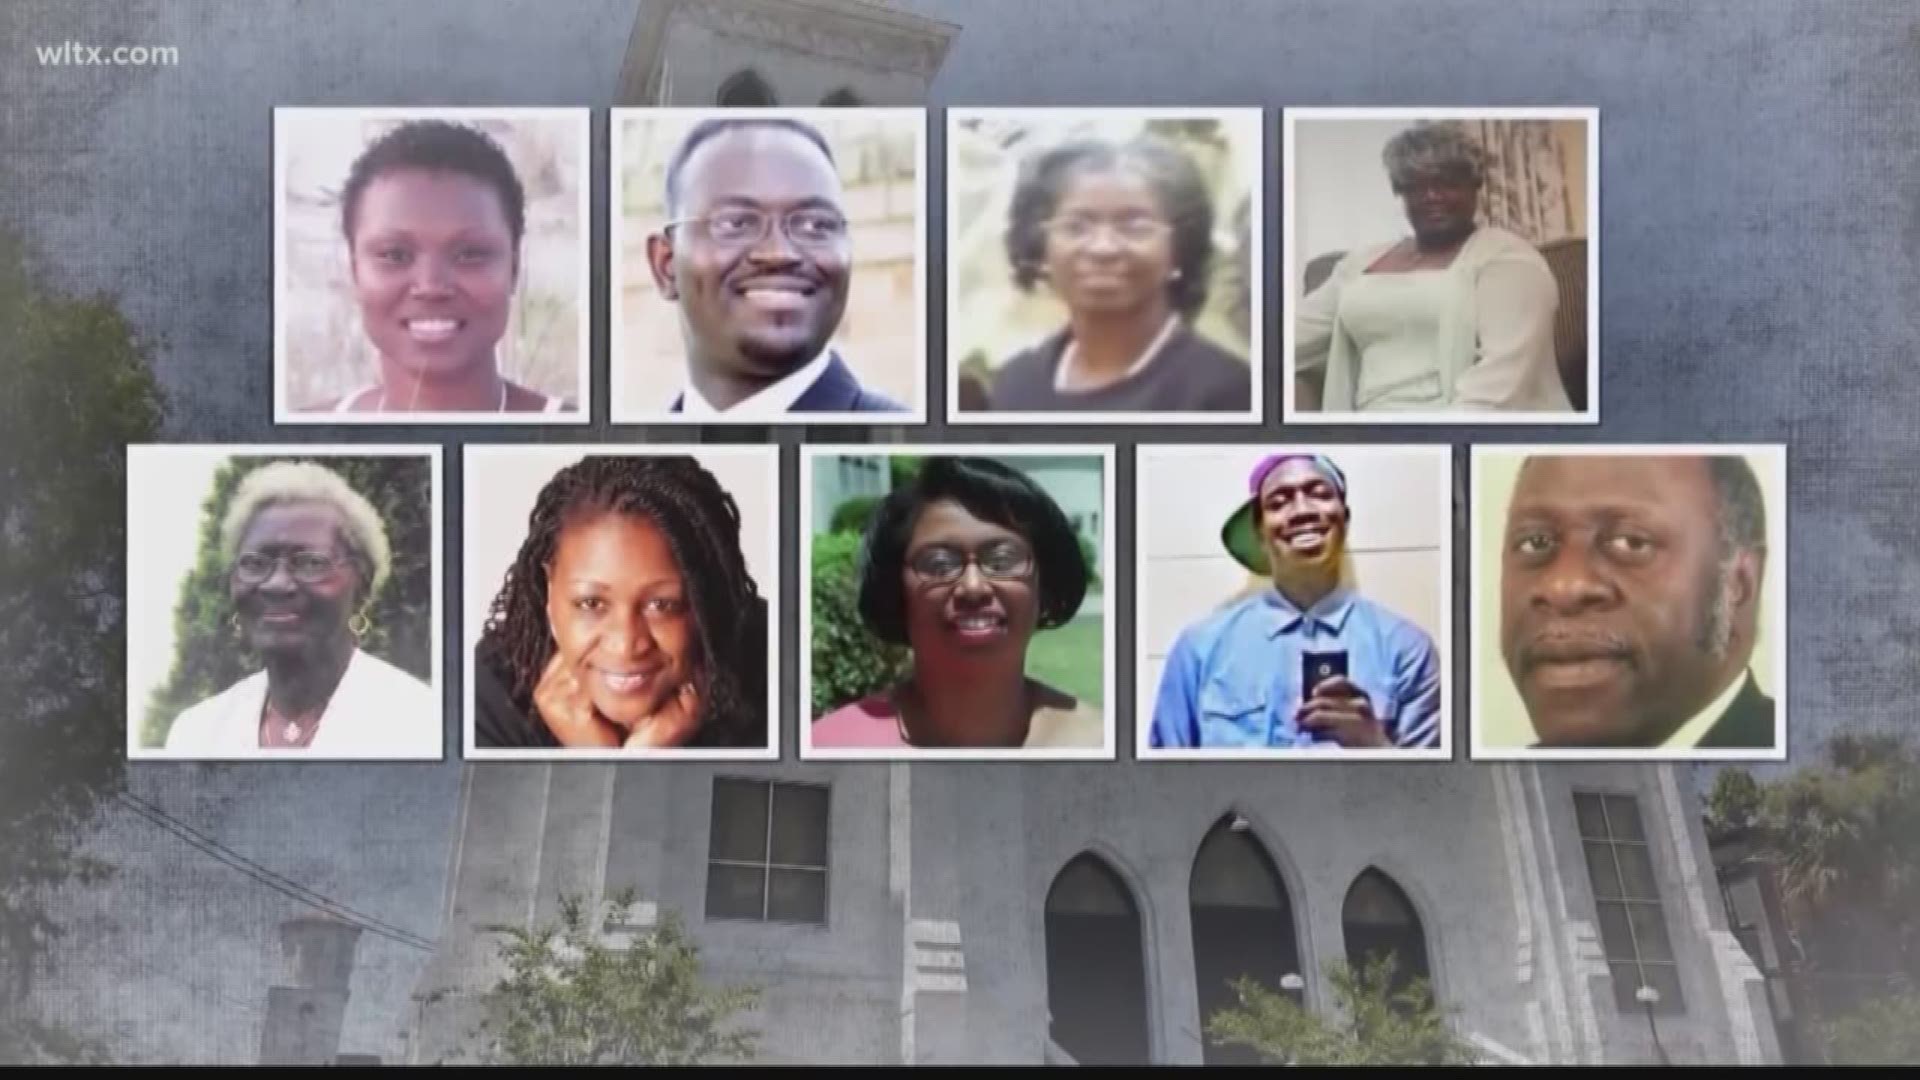 June 17 marks the fourth anniversary of the massacre at the Mother Emanuel AME Church massacre in Charleston, South Carolina.